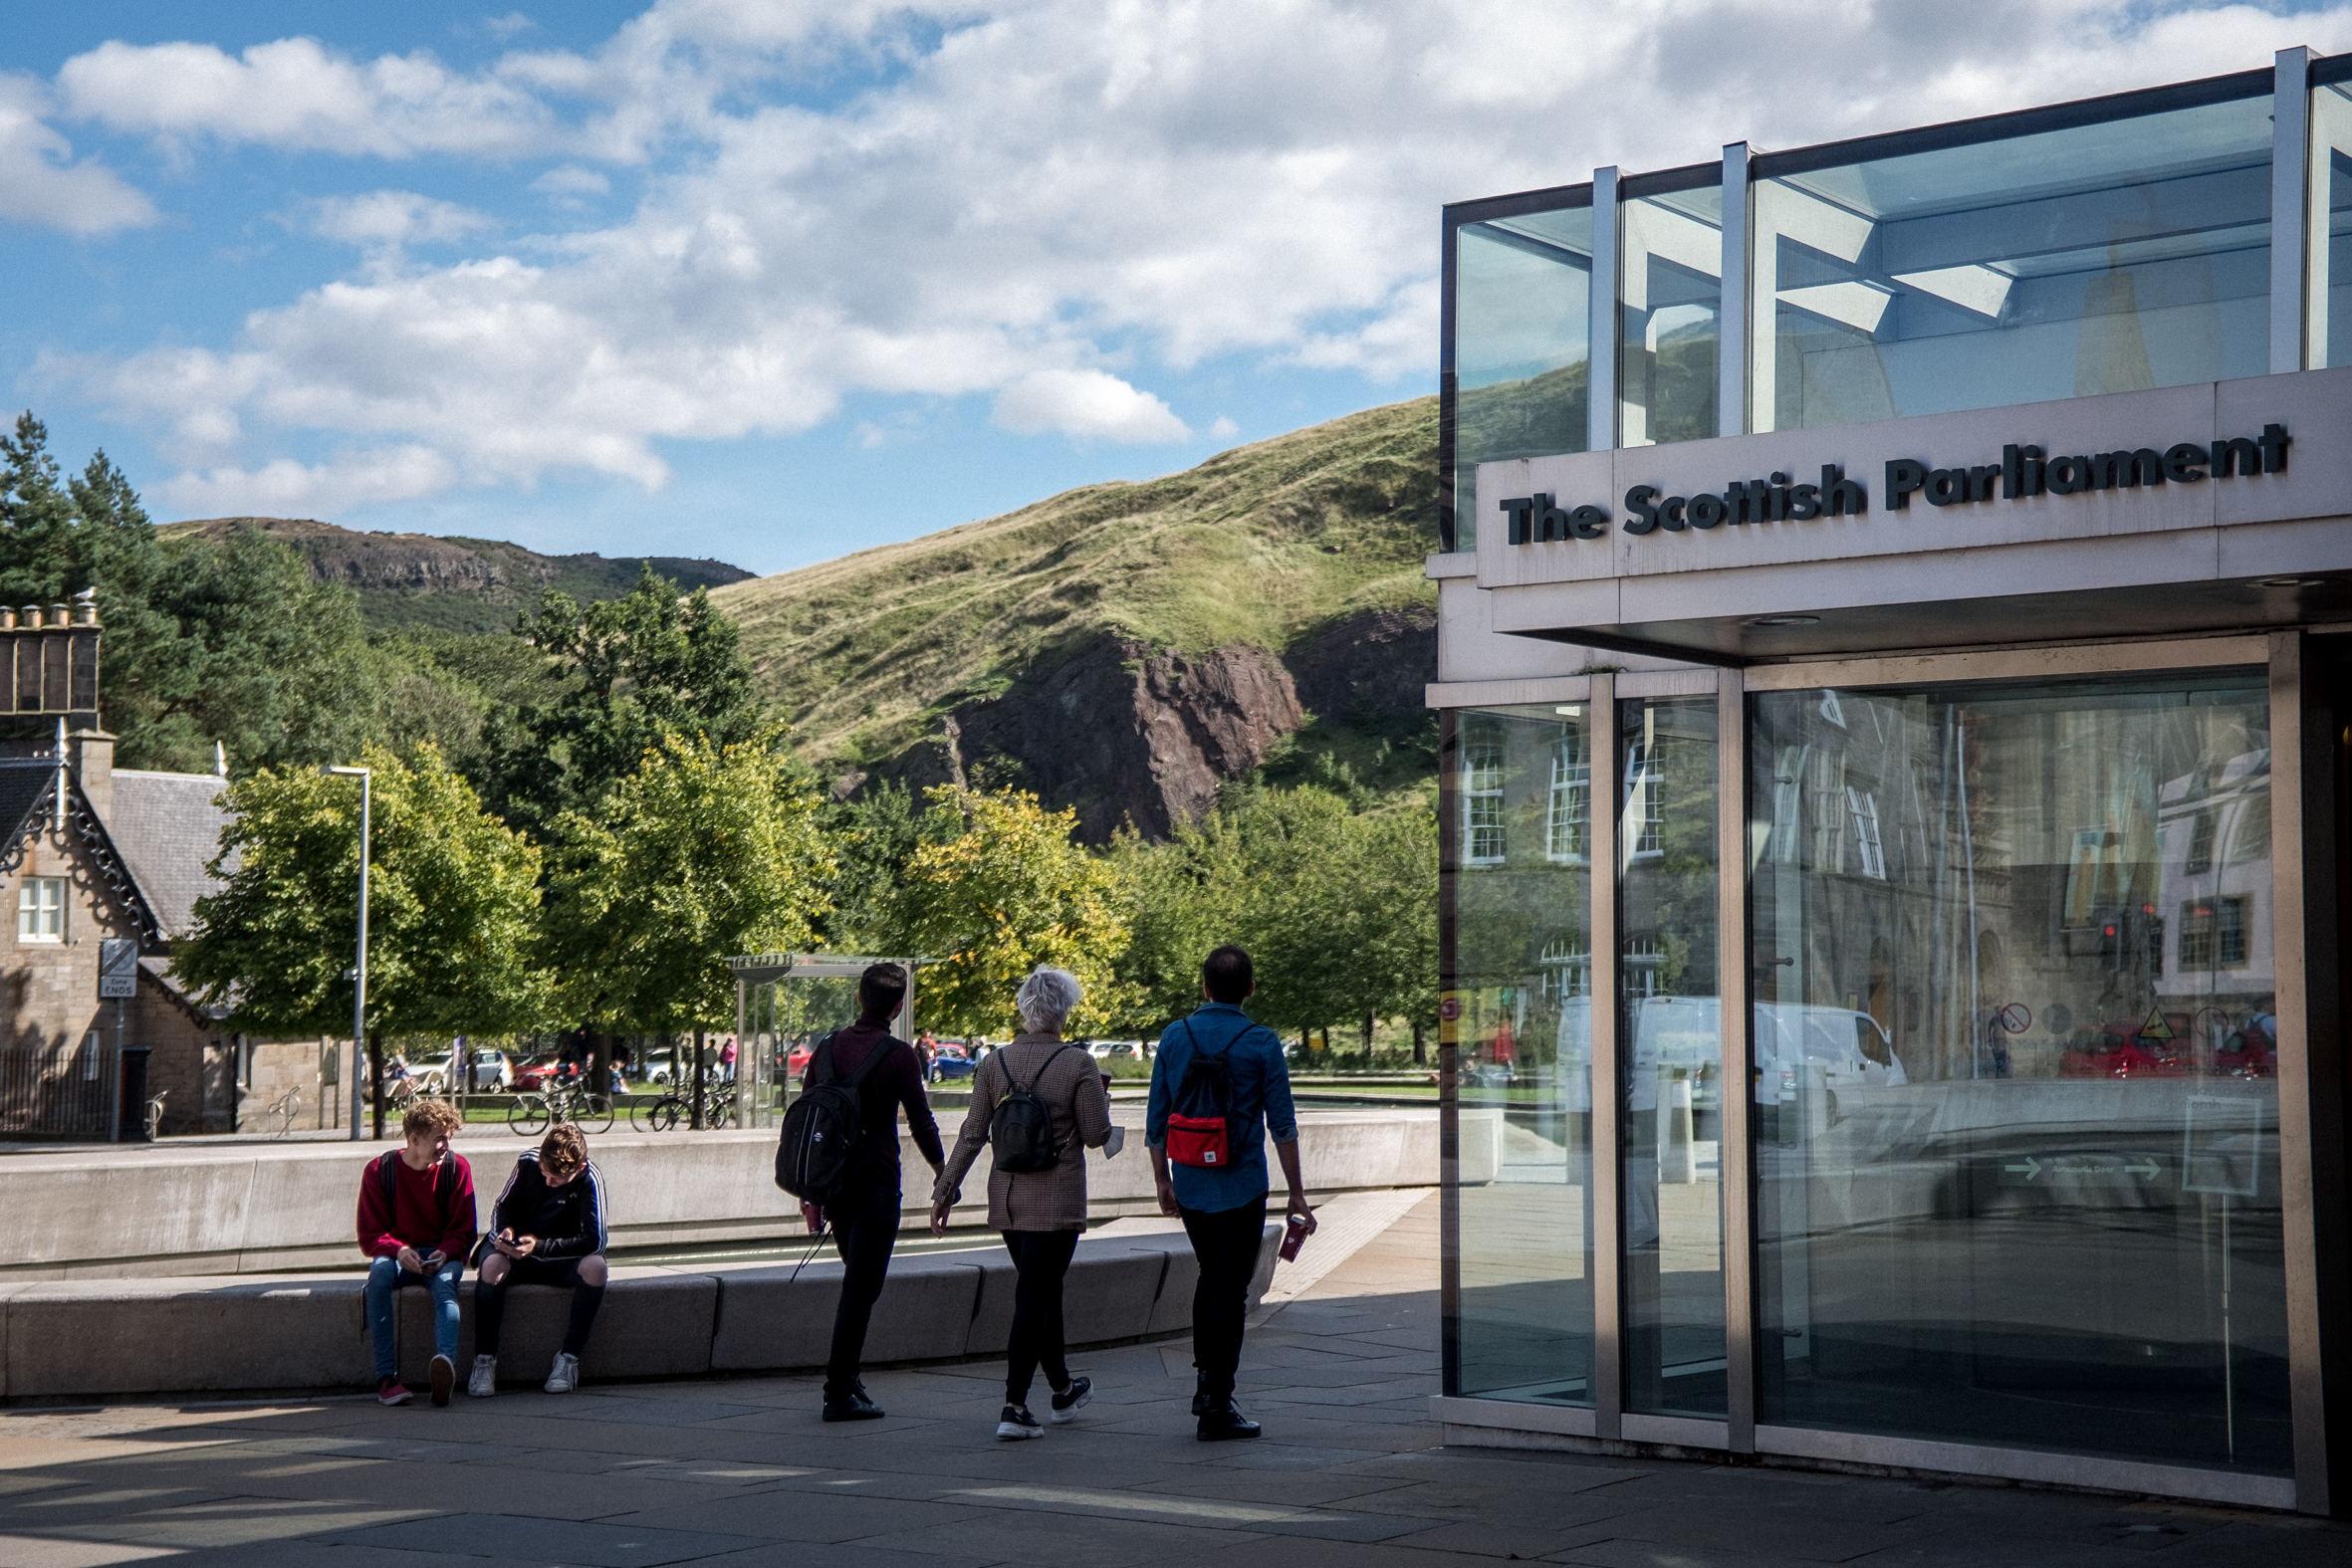 People walking by the Scottish Parliament building in Edinburgh.